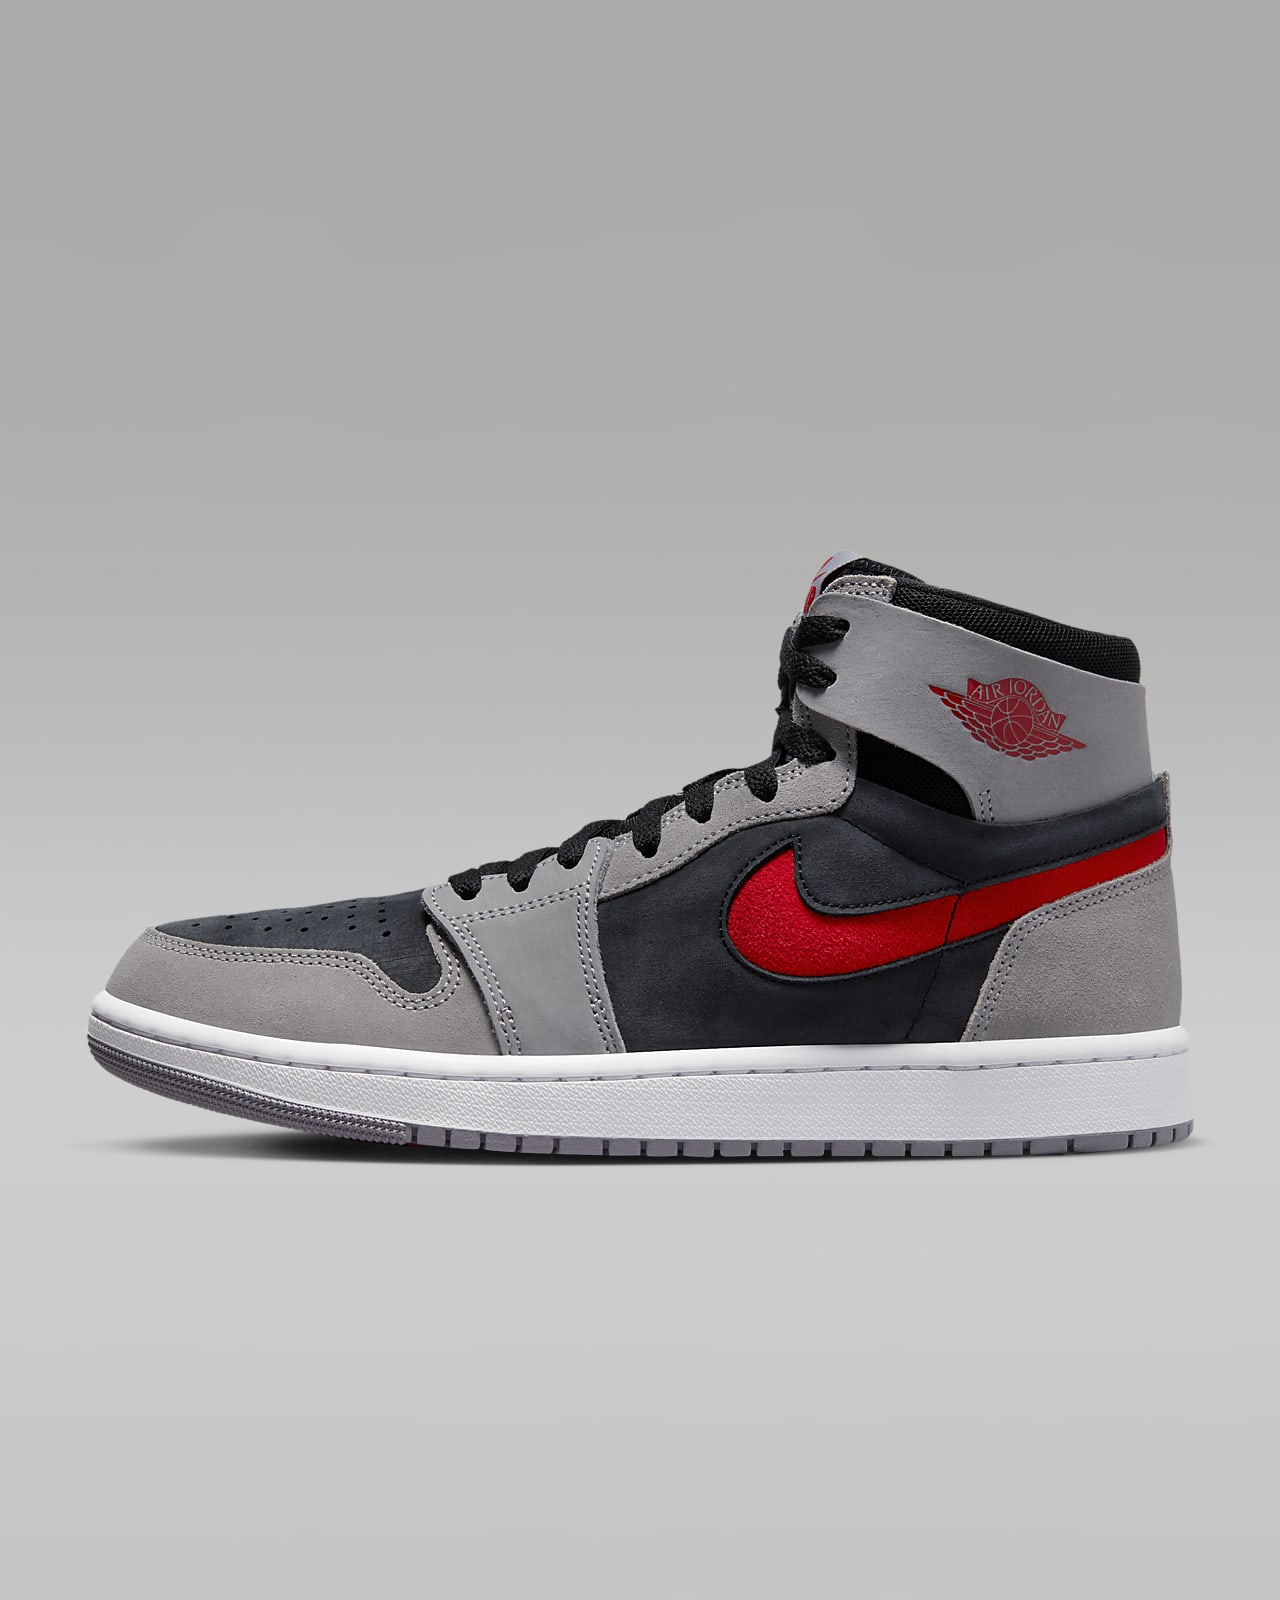 Dont Miss Out: The Ultimate Guide to Rocking Air Jordan 1 Zoom CMFT 2 Mens Shoes Like a Pro!